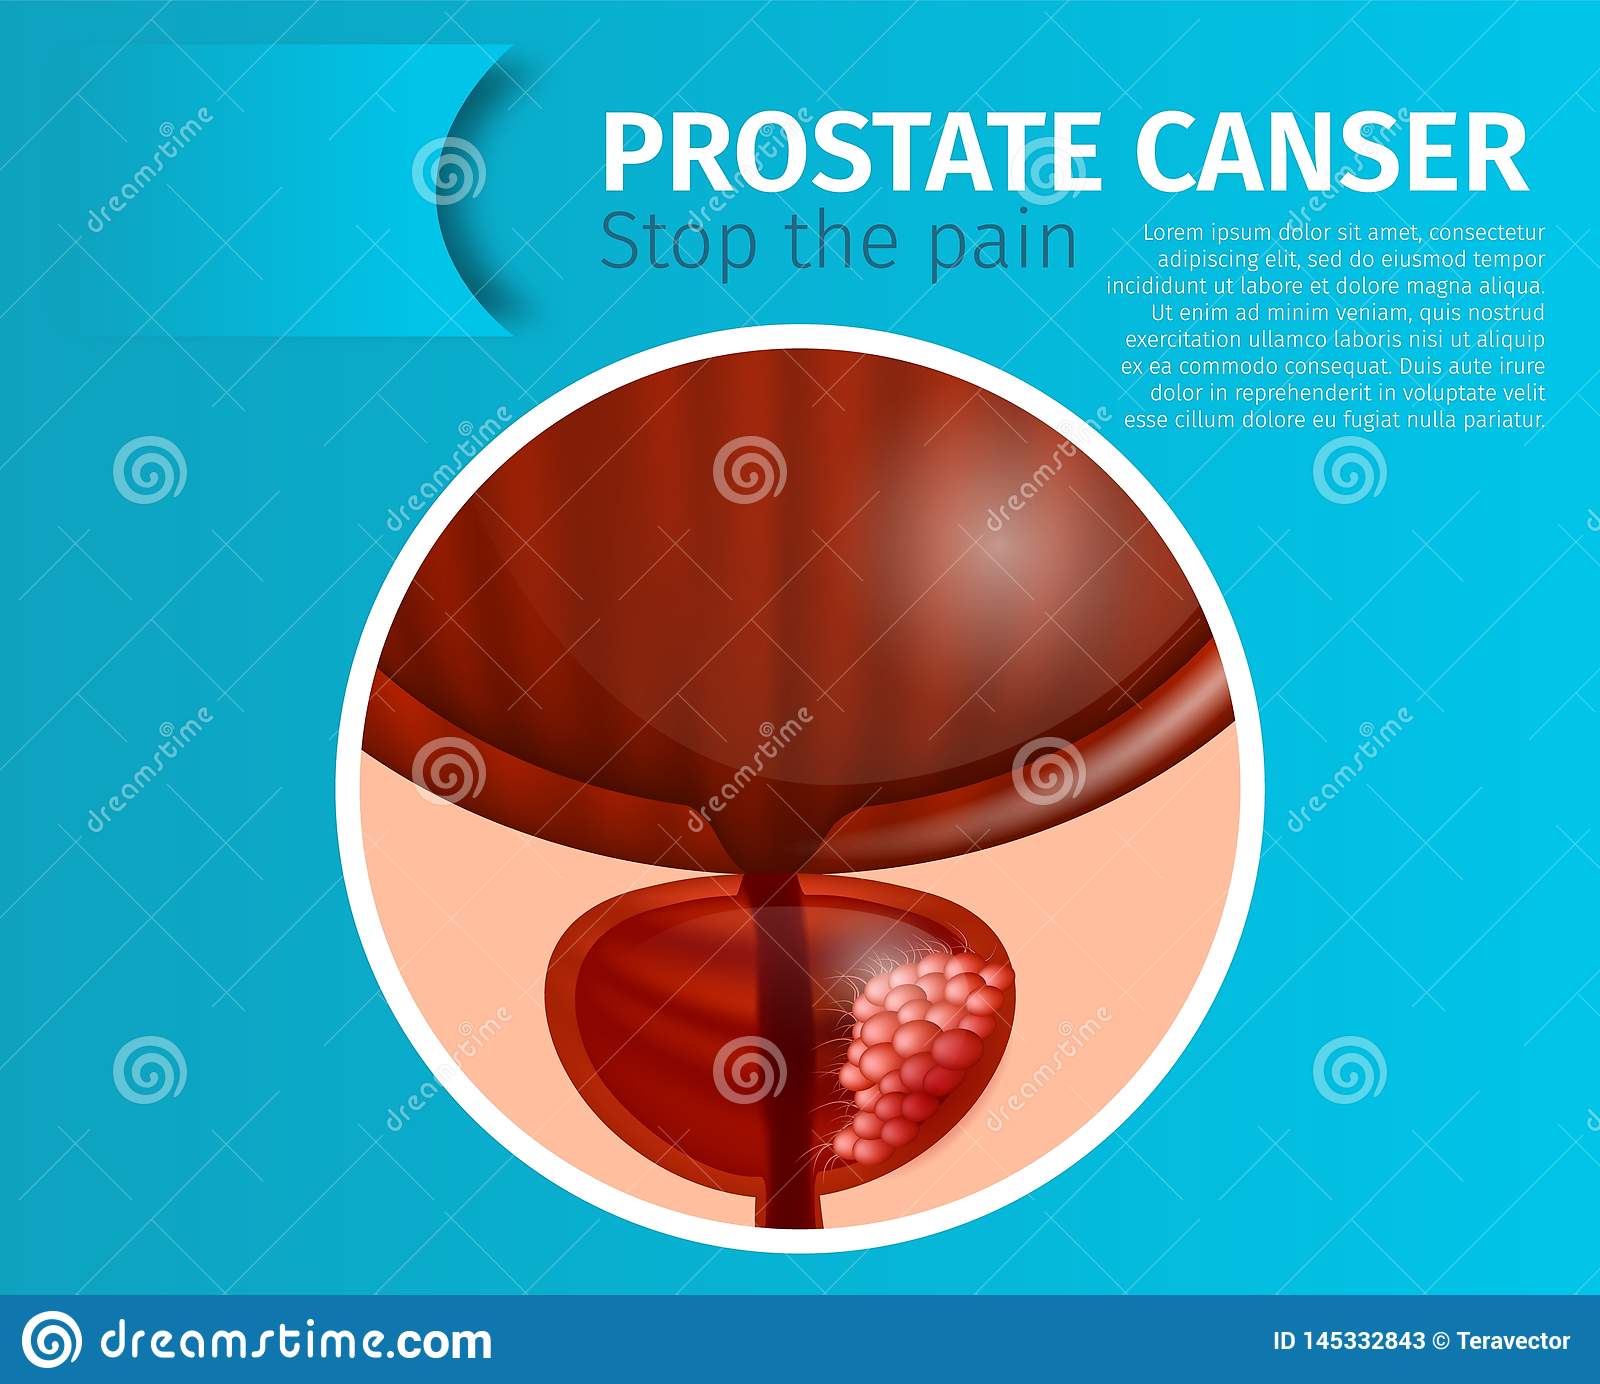 Prostate Cancer. Stop The Pain Urological Banner. Stock Vector ...